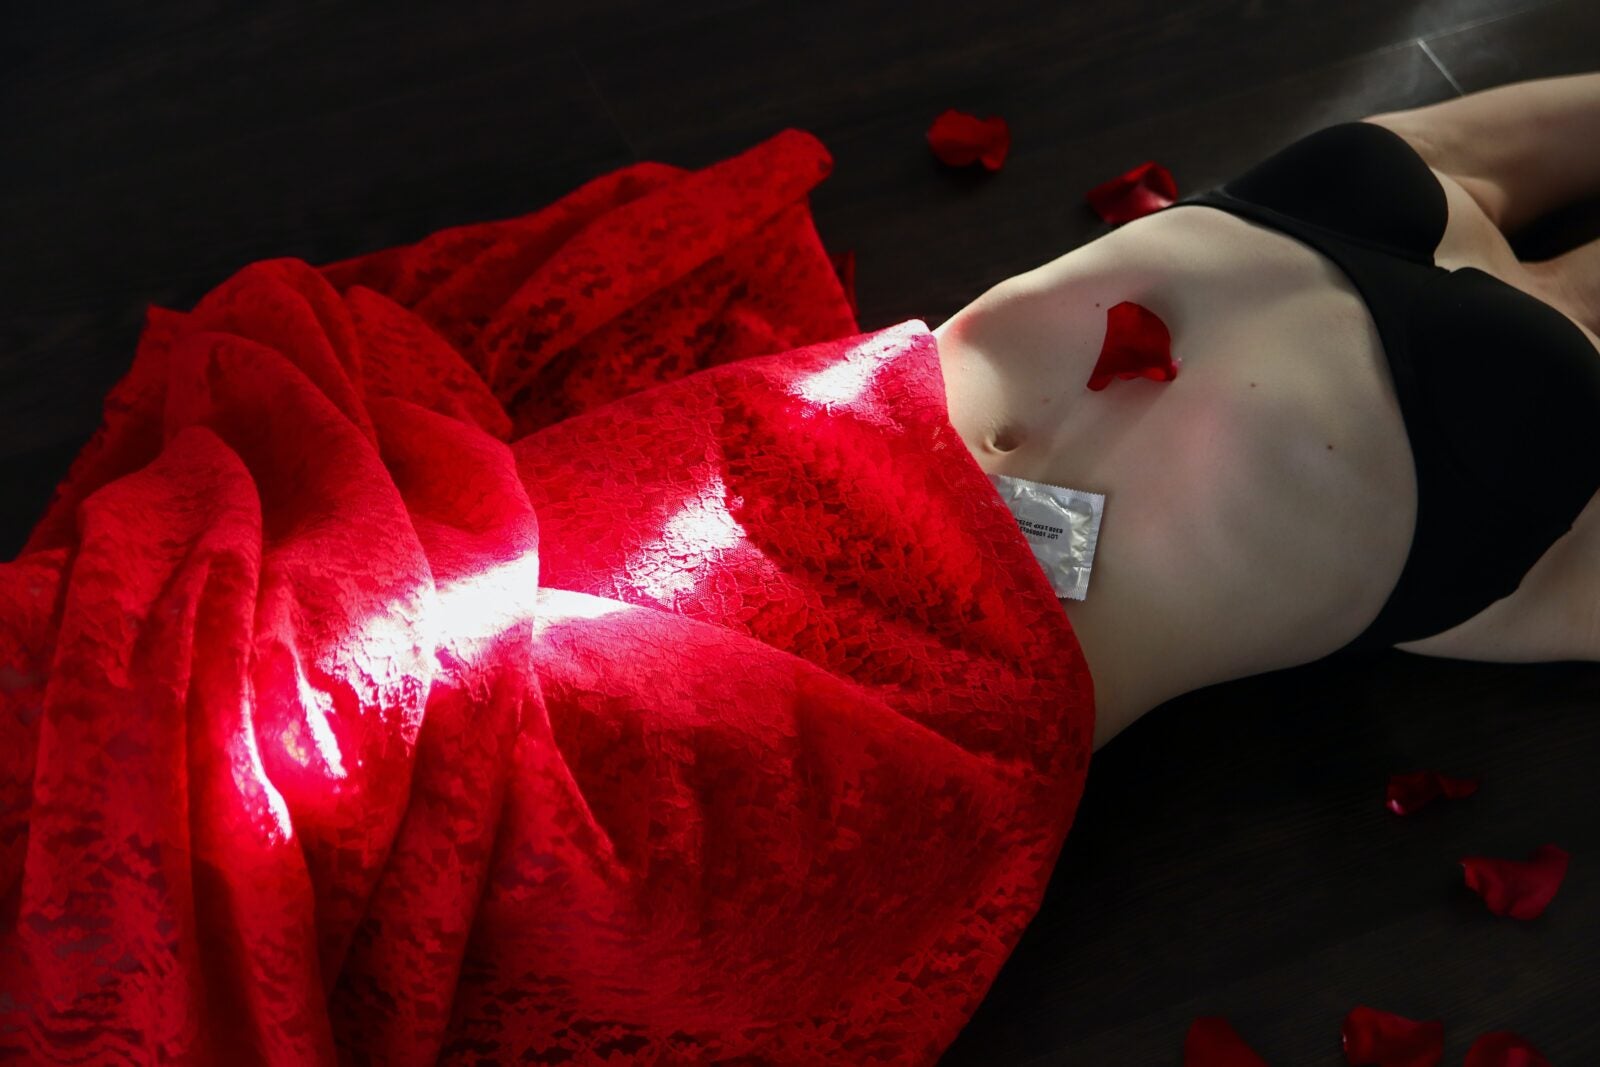 A woman lays down facing the ceiling with a red drape covering the lower half of her body, a rose petal on her abdomen and wearing a black bra. Her hands are stretched upwards and cannot be seen along with her face.